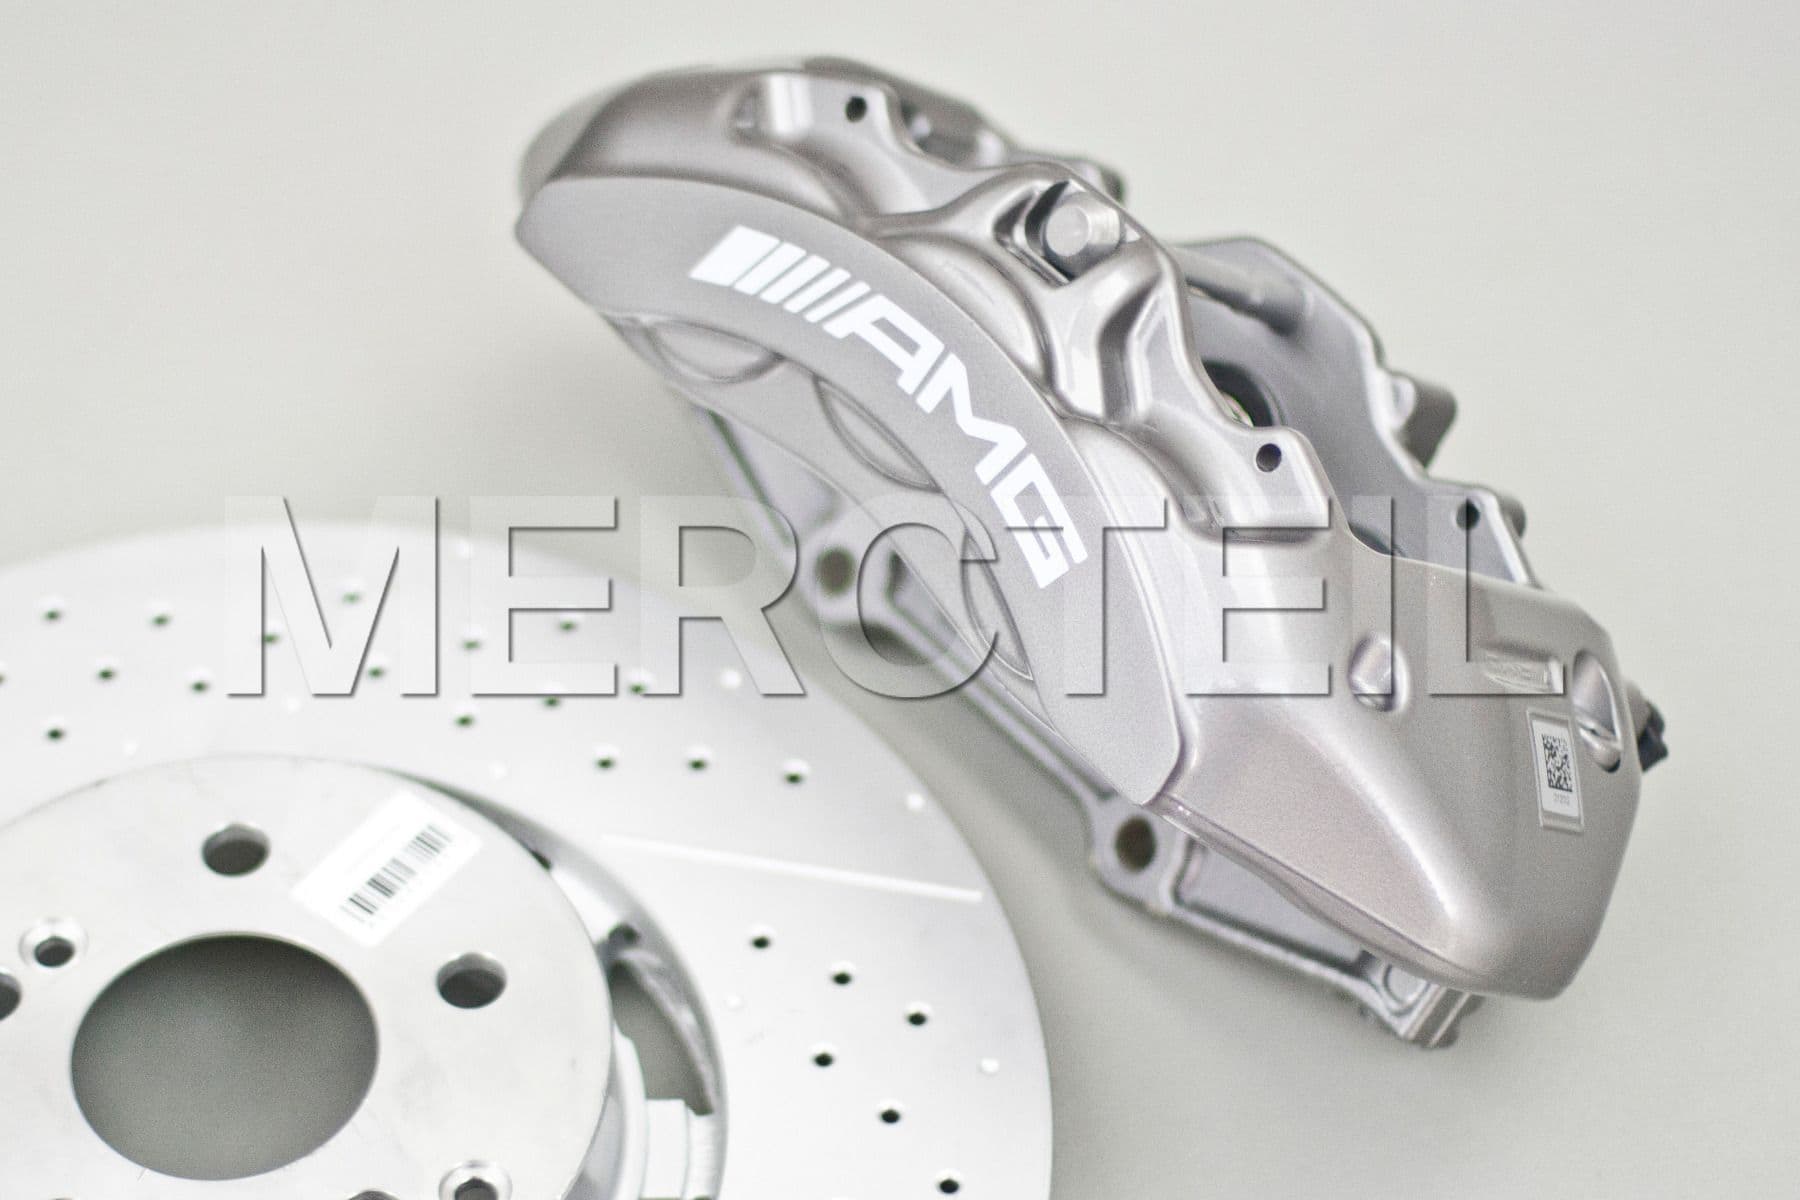 AMG Grey Brake System for E-Class W212, CLS-Class C218